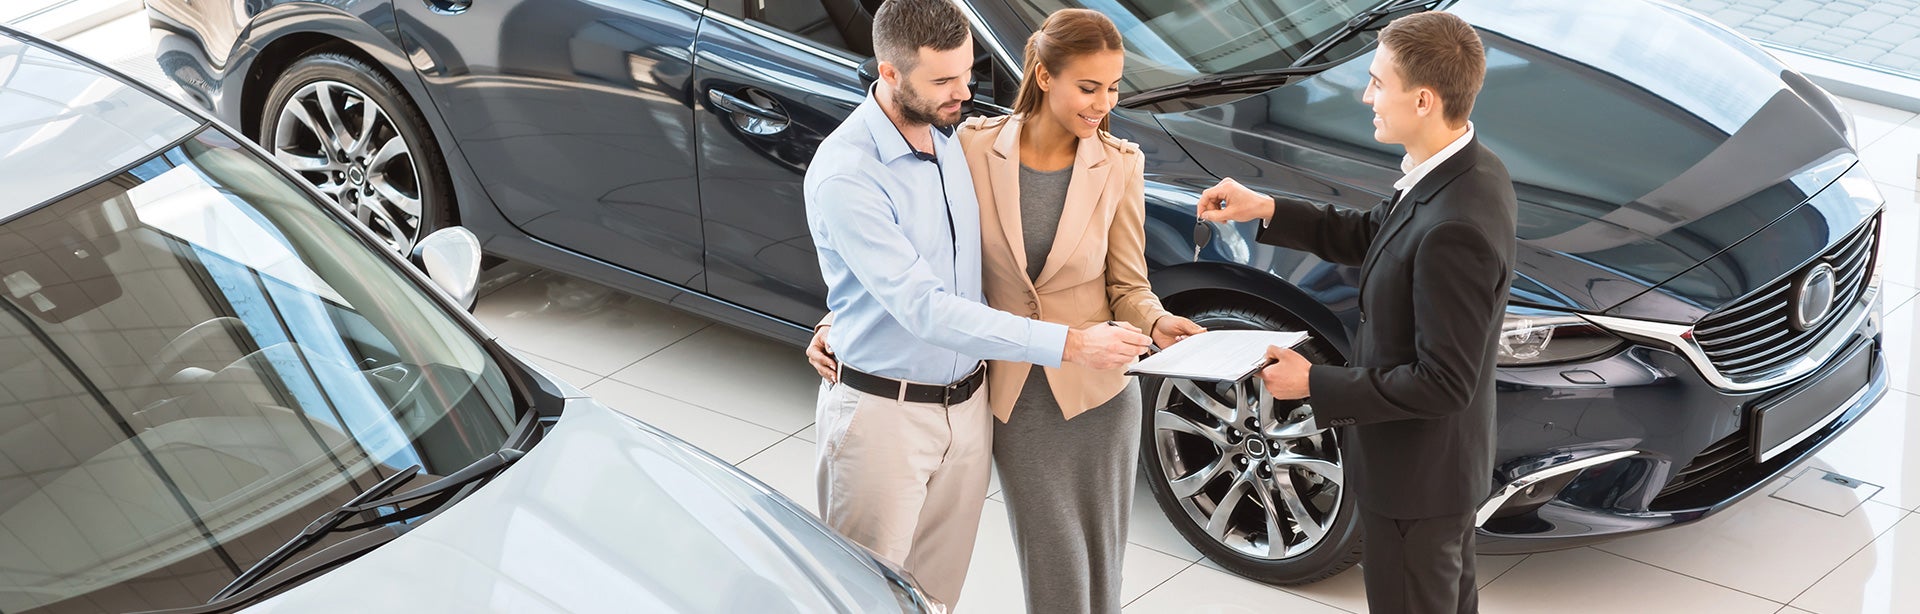 Why Loveland Lincoln Is the Lincoln Dealership For You